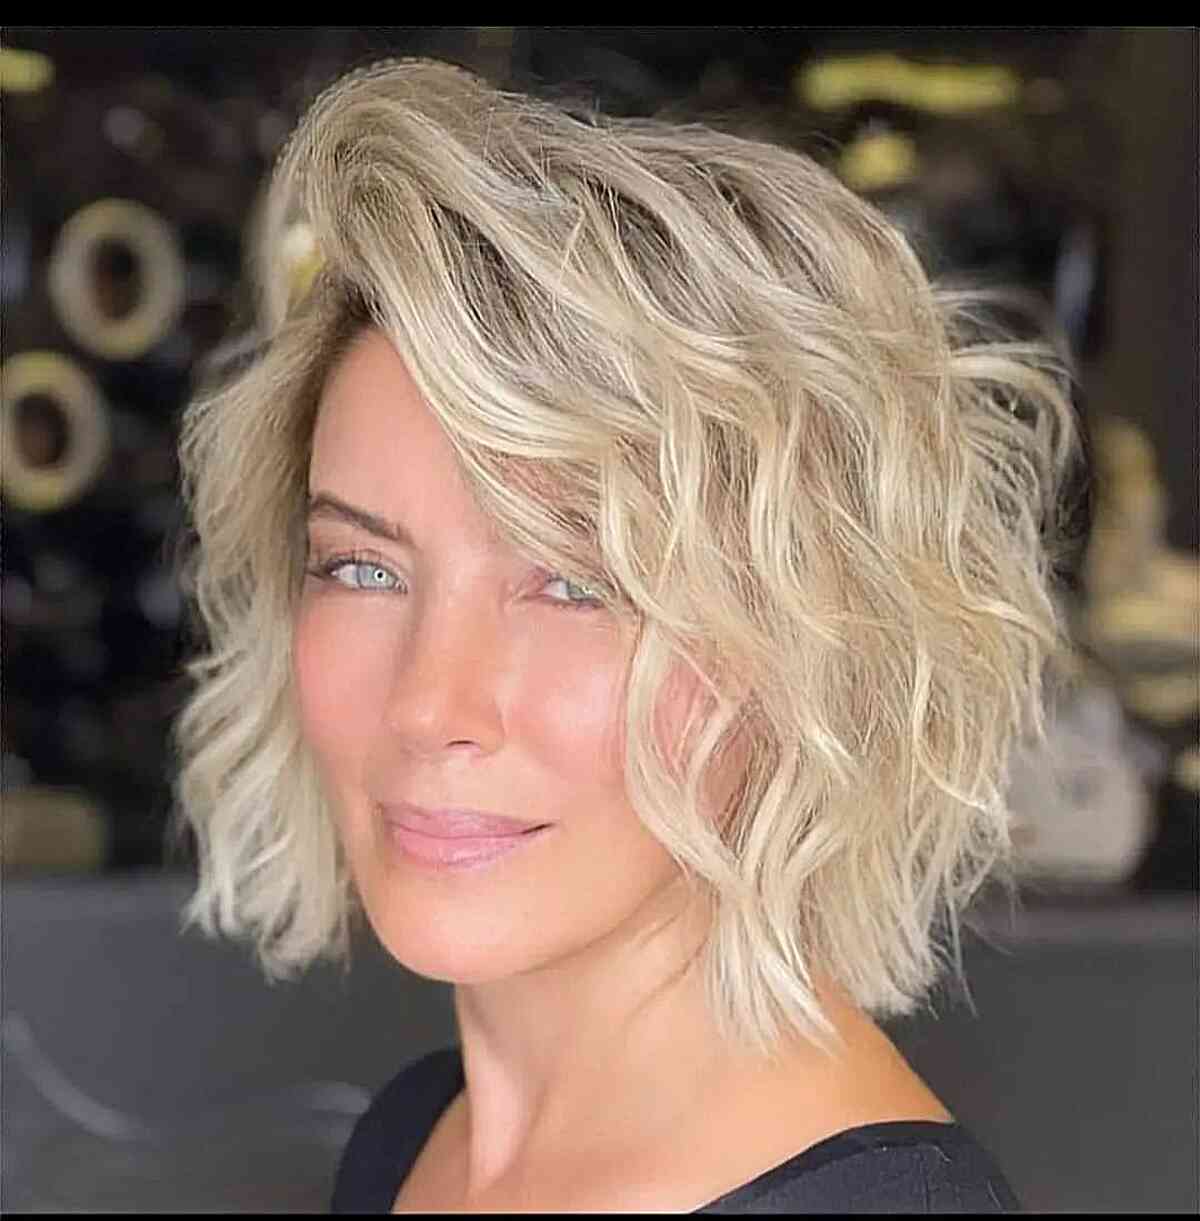 Cool Fall Trend: 46 Textured Bobs You Have to See